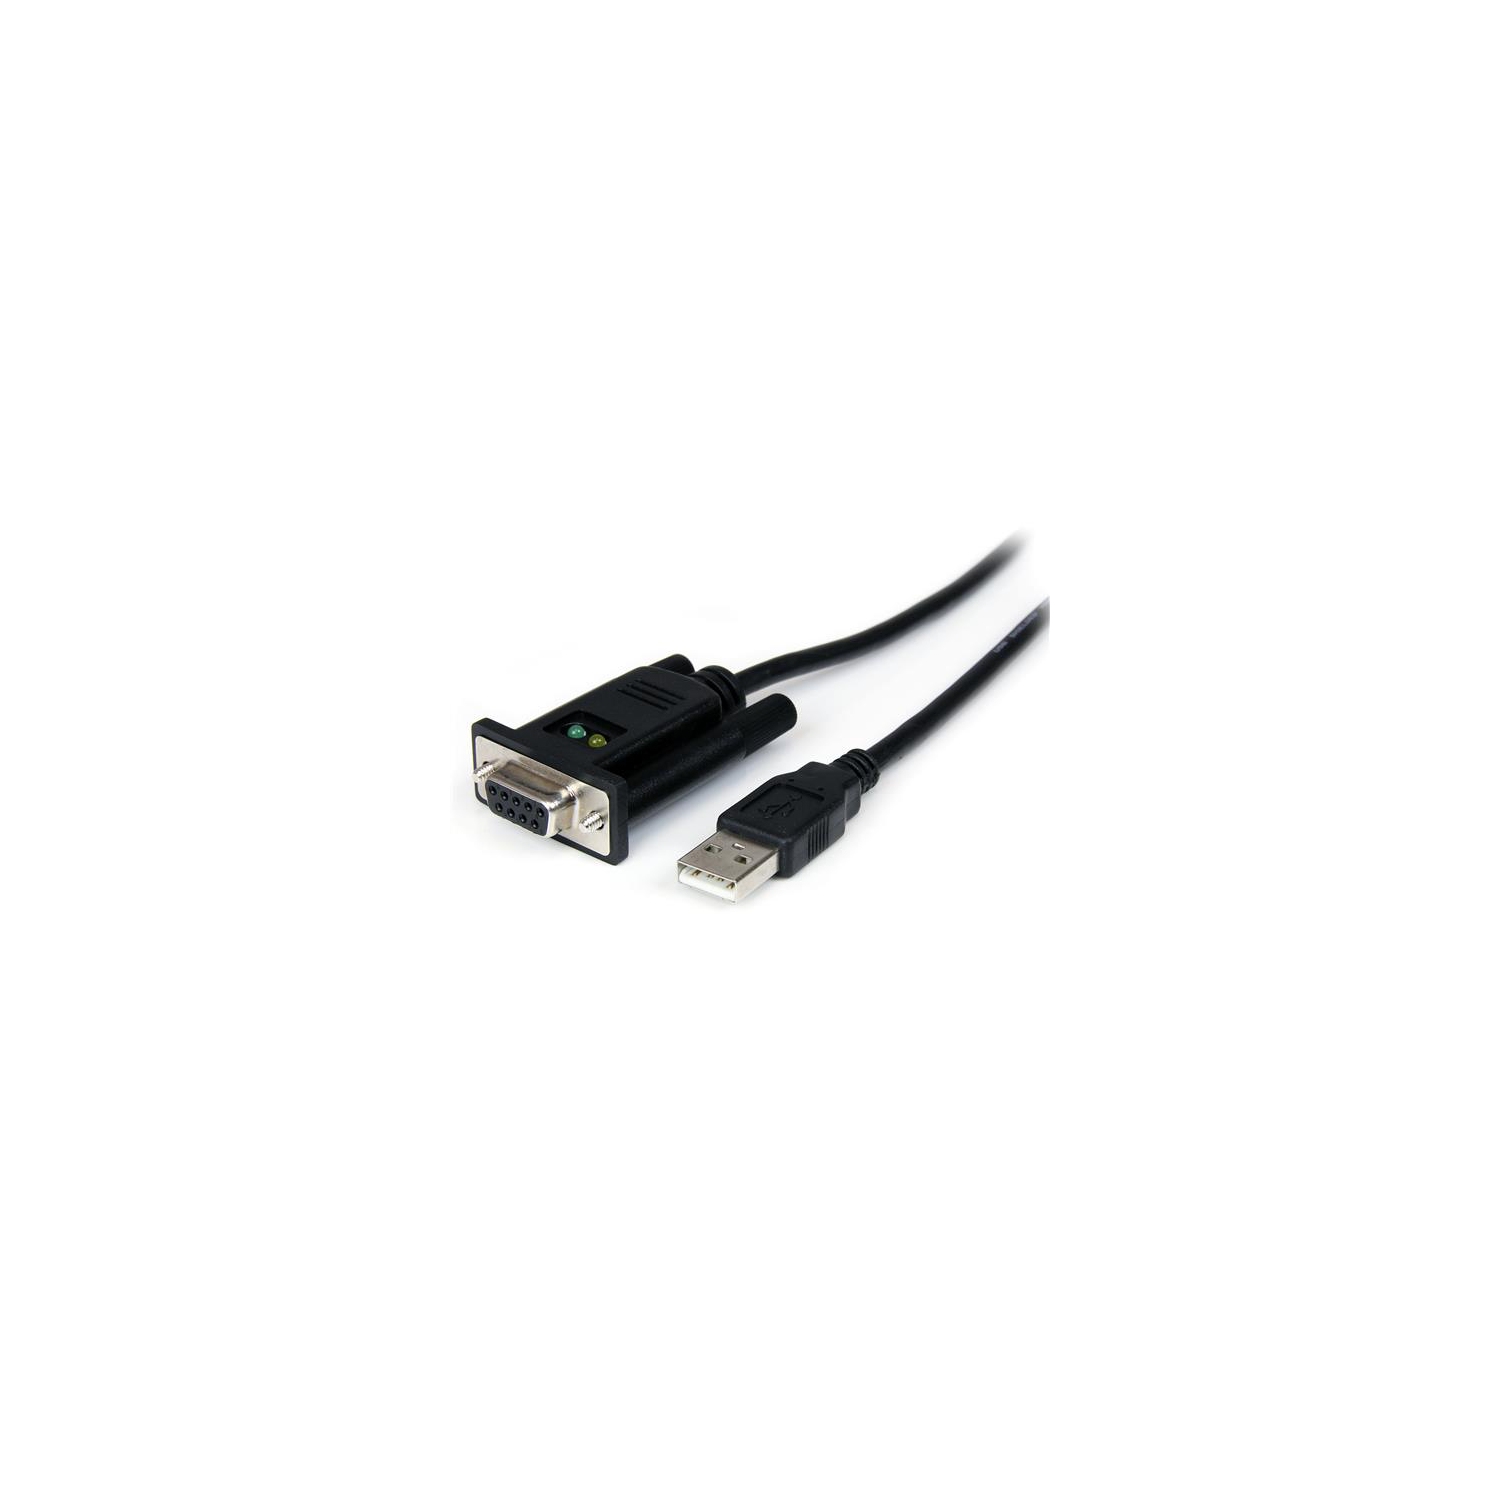 Startech USB to Null Modem RS232 DB9 Serial DCE Adapter Cable (ICUSB232FTN)